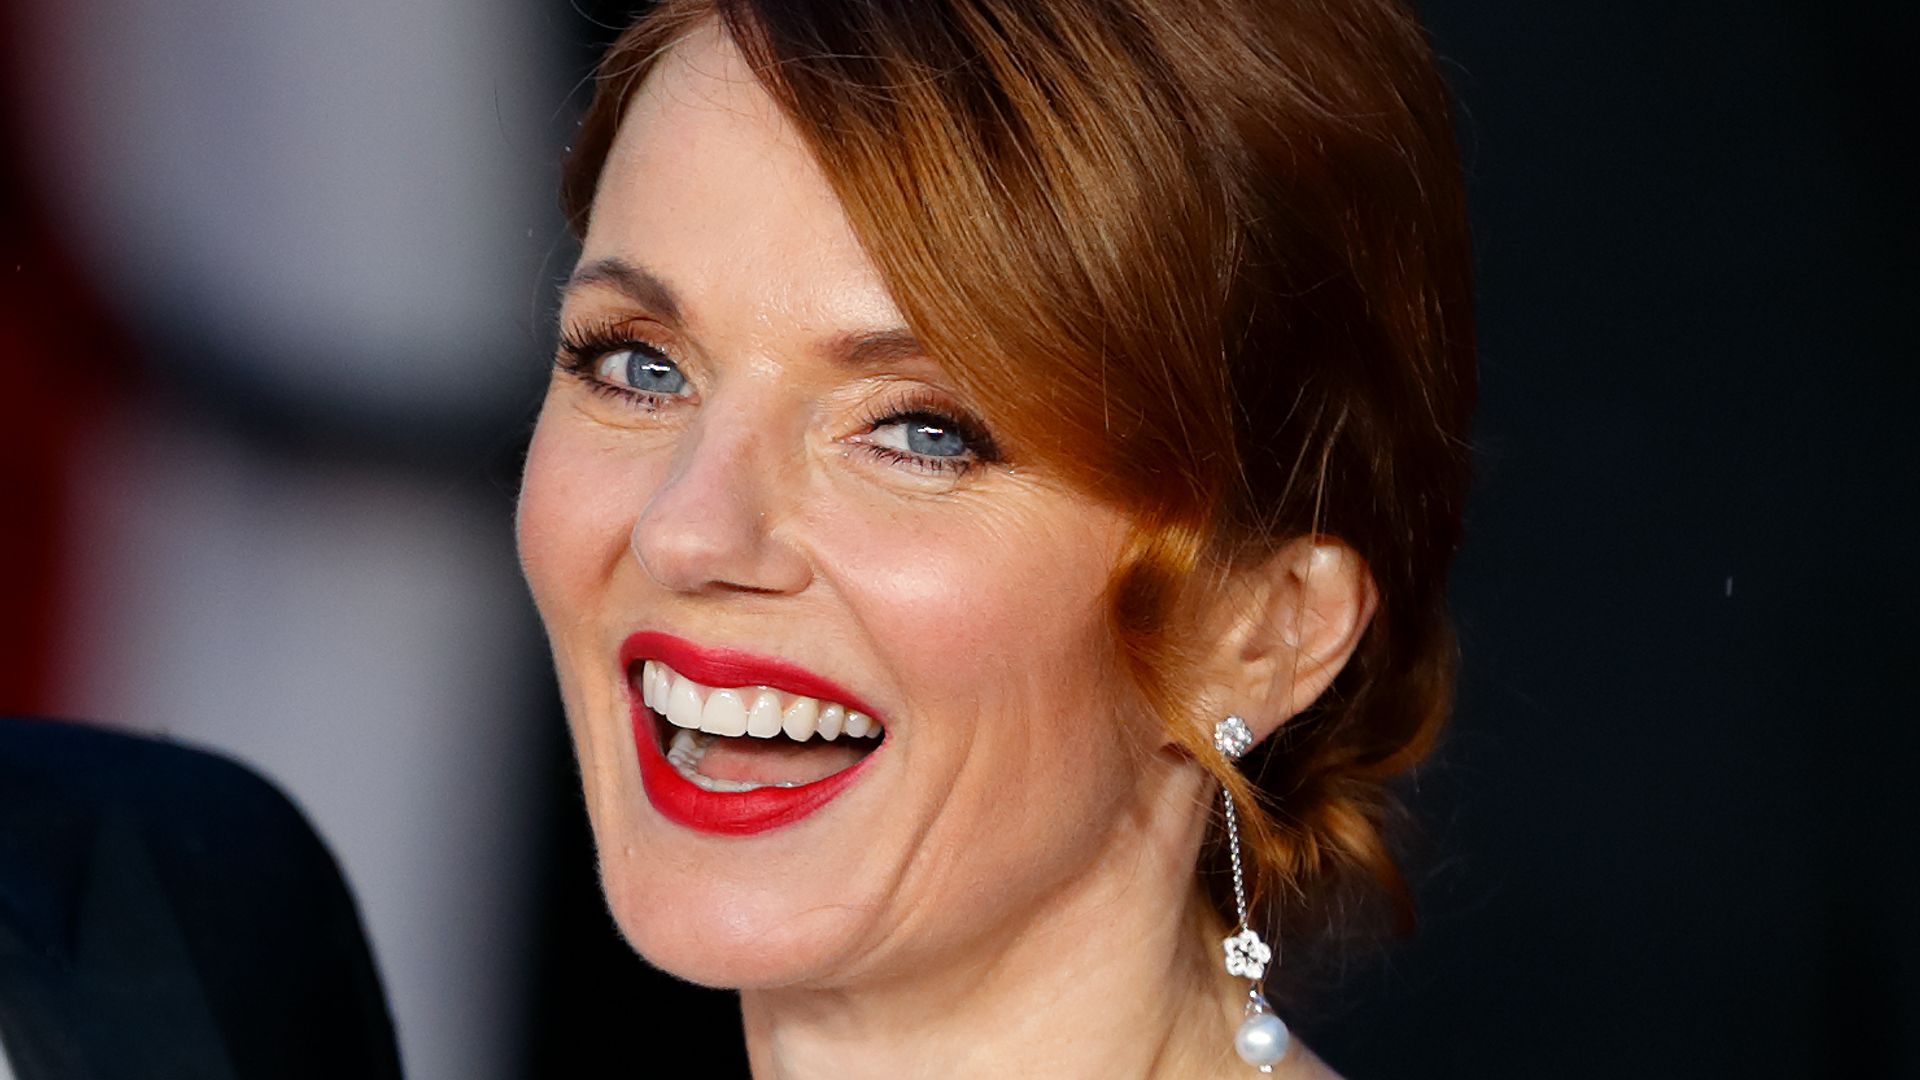 Geri Halliwell Horner with red lipstick at No Time To Die world premiere 